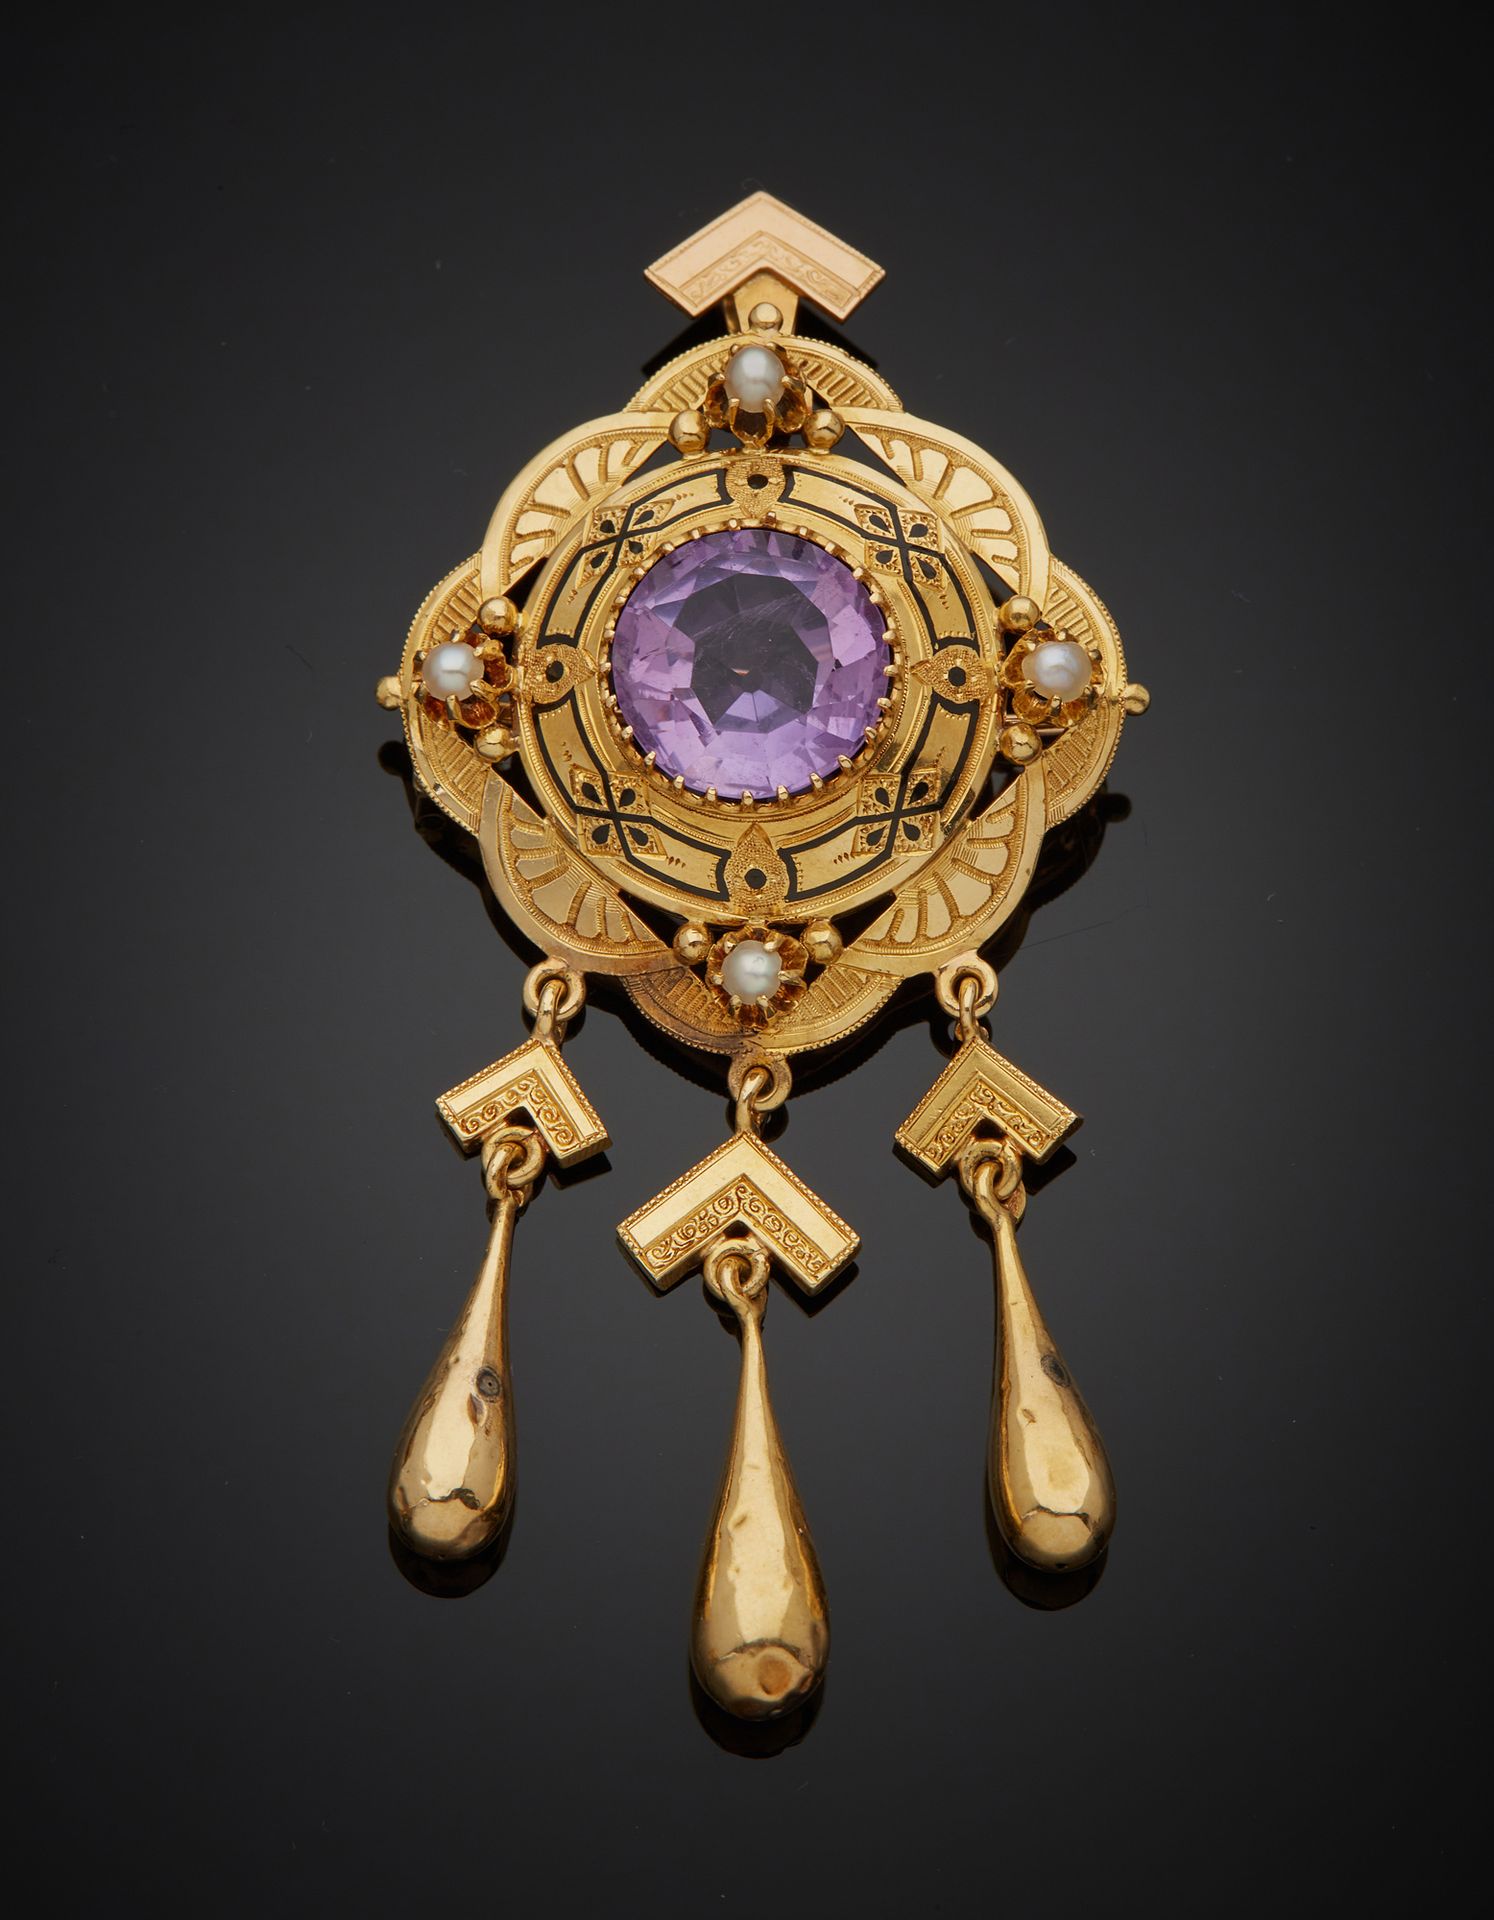 Null Polylobed brooch in 18K yellow gold 750‰, adorned in its center with a roun&hellip;